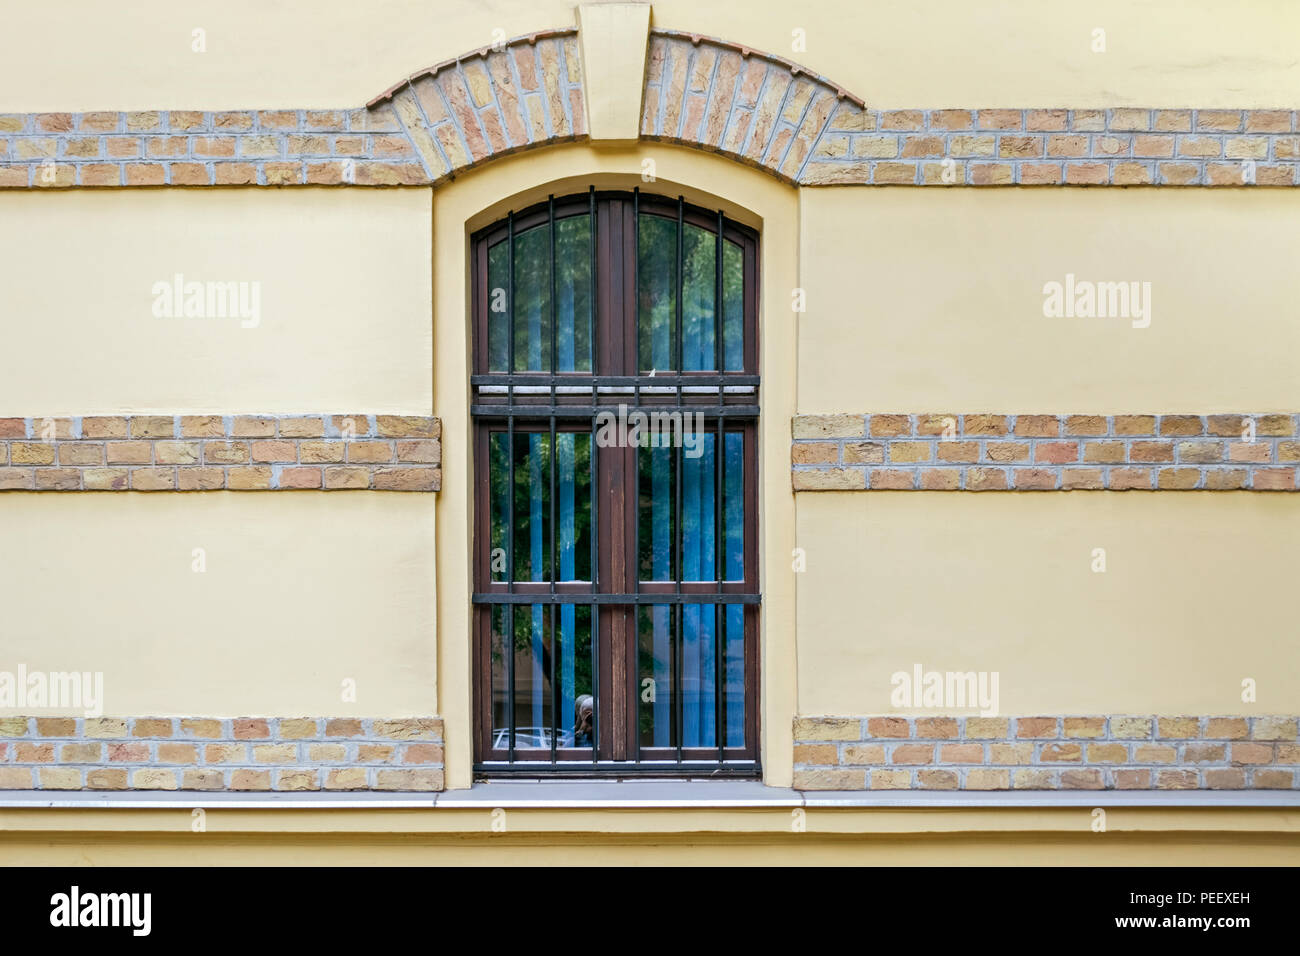 Window With Arch And Iron Bars On The Yellow Wall With Decorative